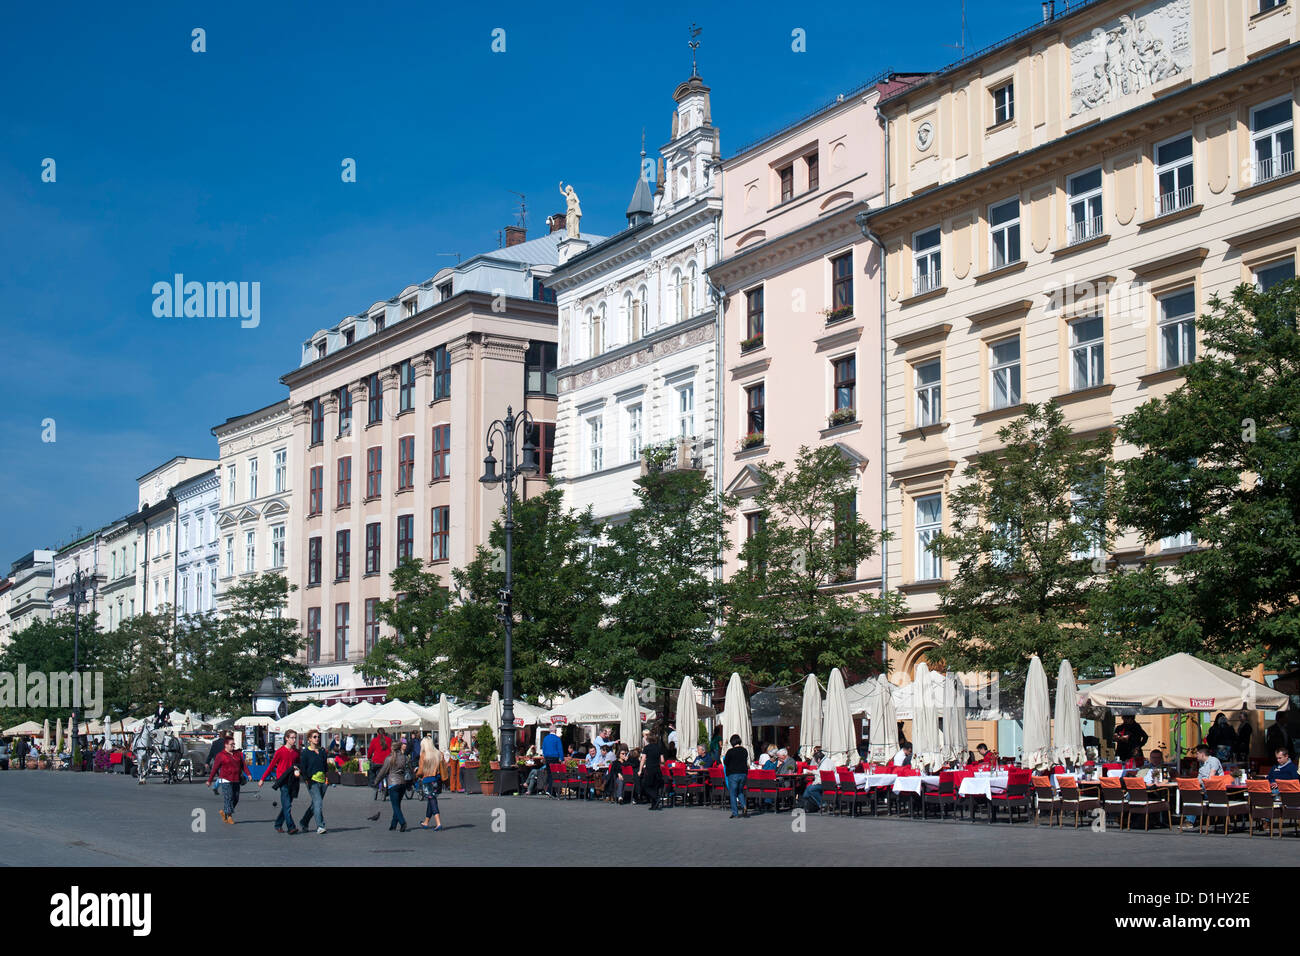 Buildings on Rynek Glówny, the main town square in Krakow in southern Poland. Stock Photo